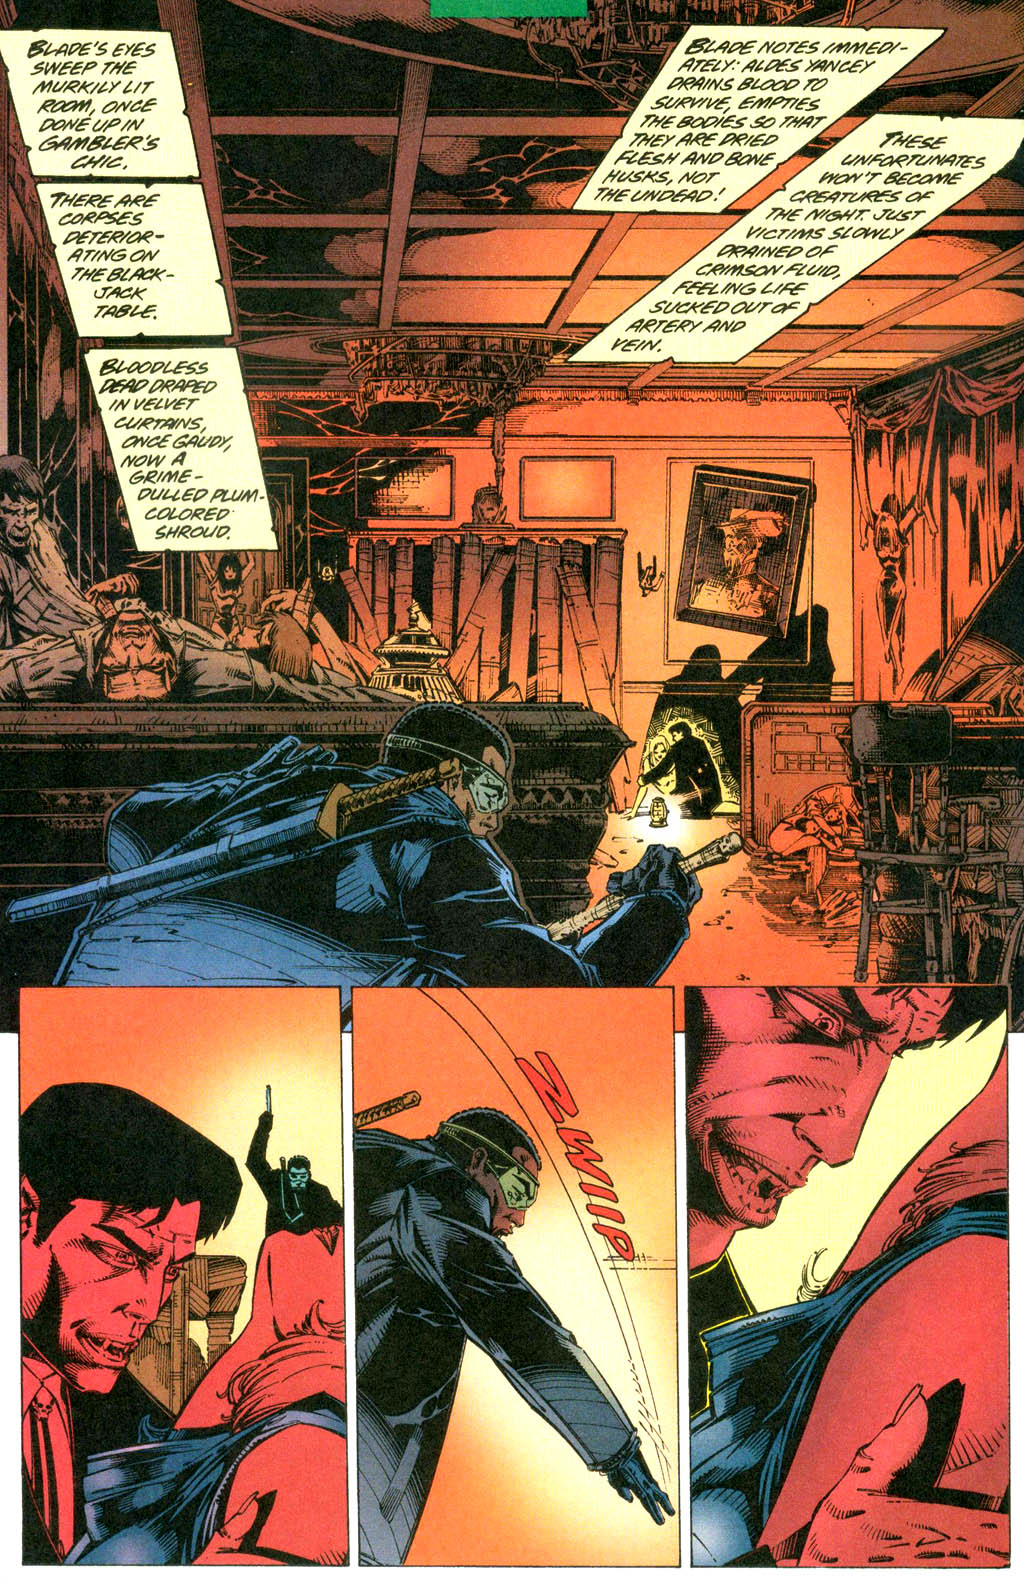 Blade (1998) 1 Page 10